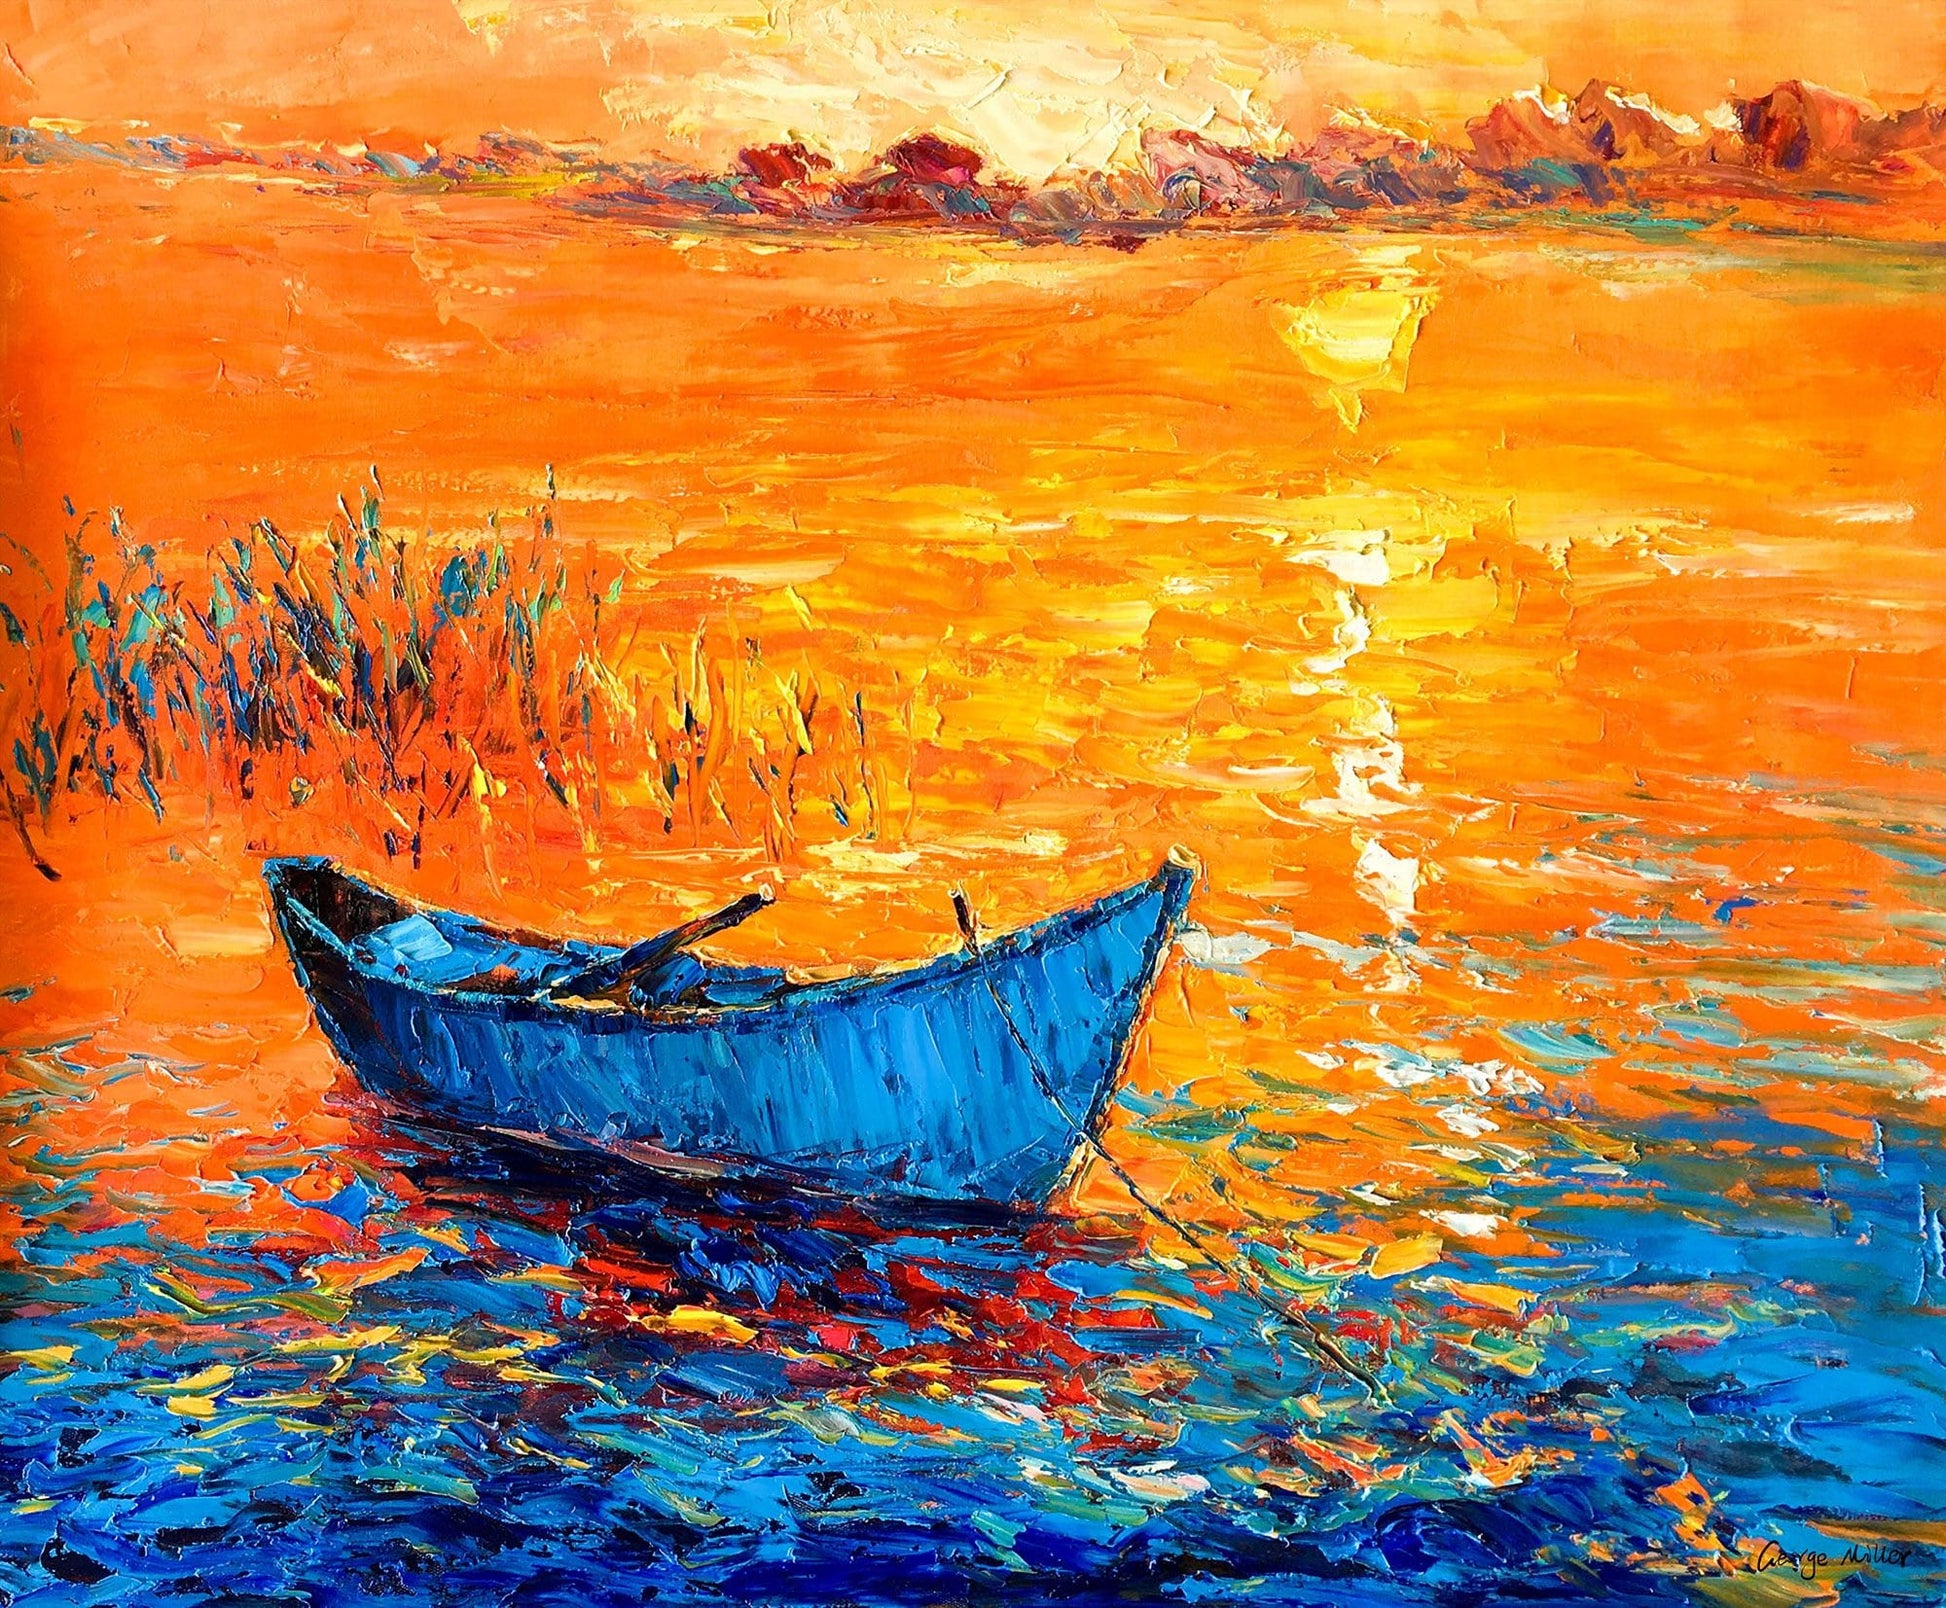 Oil Painting Fishing Boat At Sea Sunset, Wall Art, Oil Painting, Landscape,  Handmade Painting, Modern Wall Art, Textured Painting